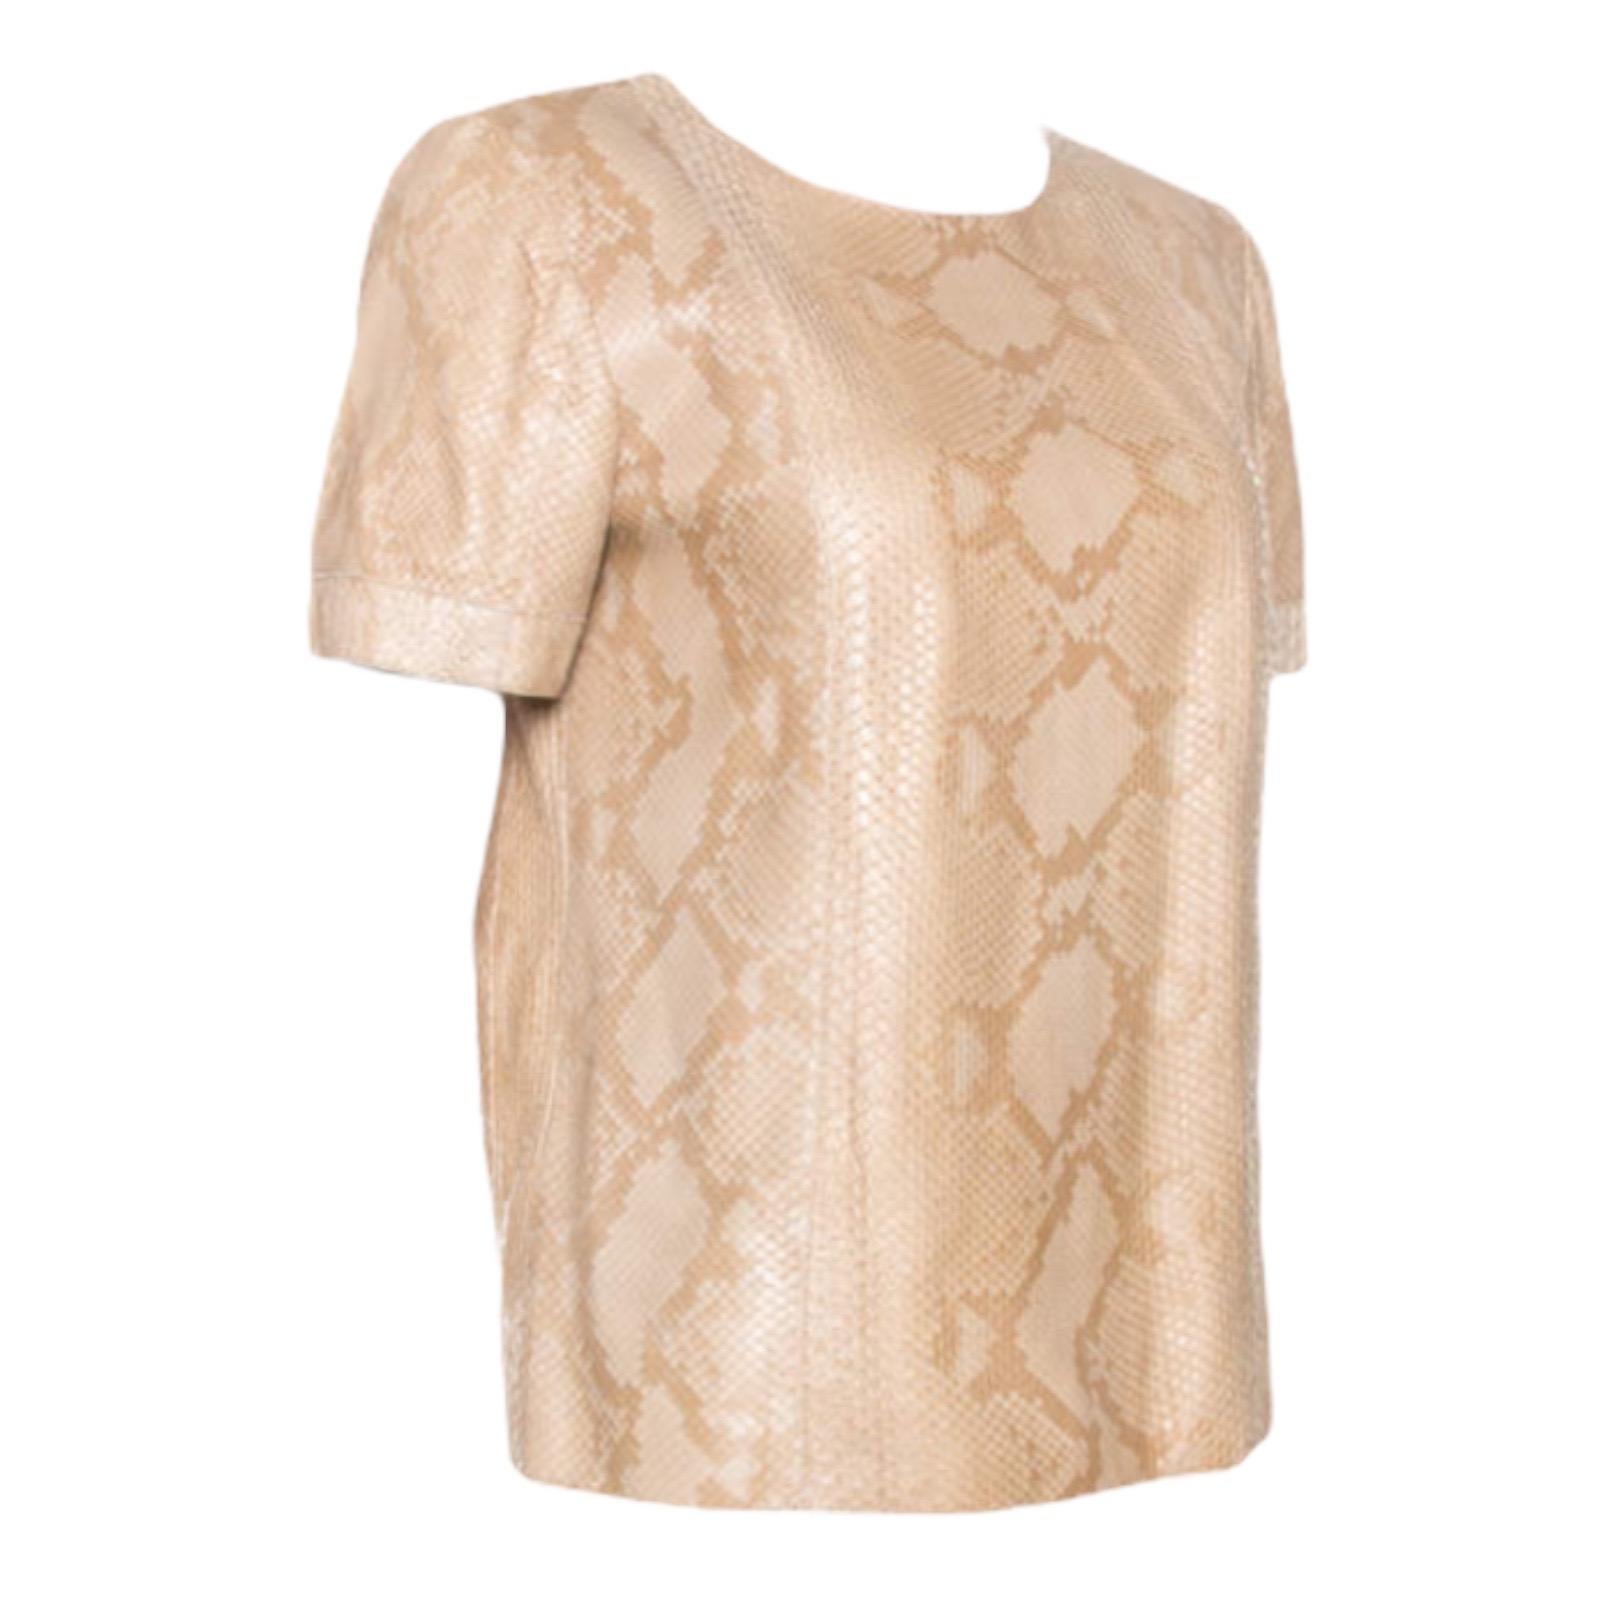 A very special piece by GUCCI
From Gucci's special exotic skins collection
Such an elegant, sophisticated and classy piece that works with everything - so versatile
Shirt top made out of the finest skin mat python skin existing - no print!
Fully